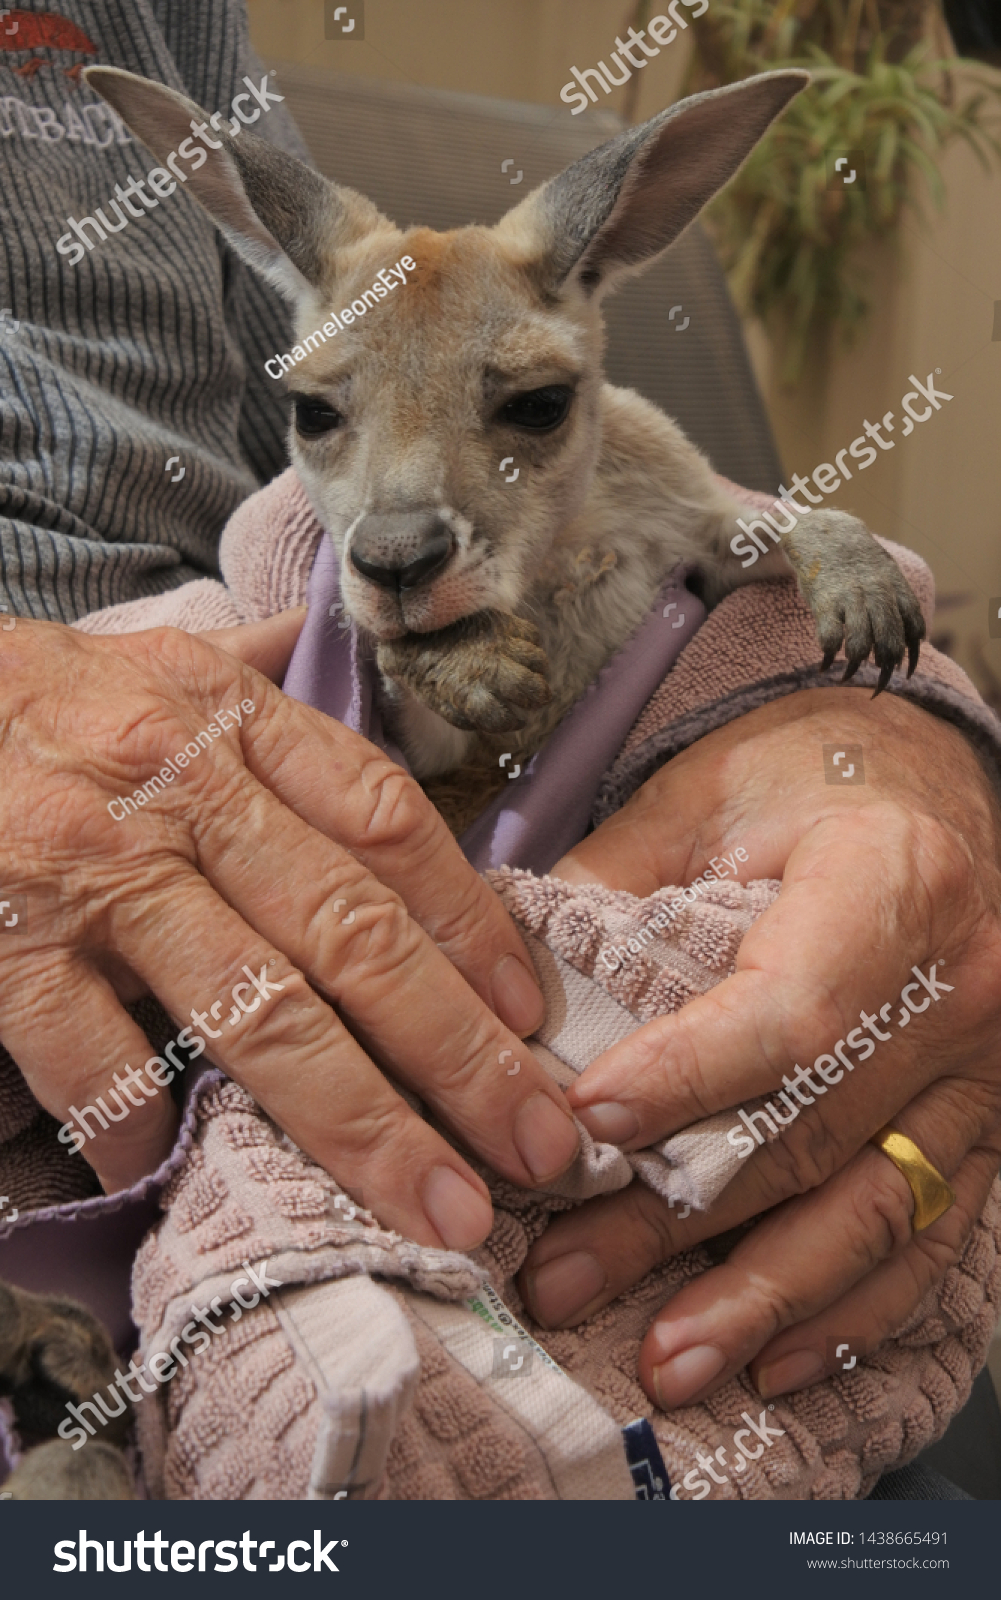 Unrecognizable Person holding a Kangaroo joey. A kangaroo joey is toilet trained from birth #1438665491